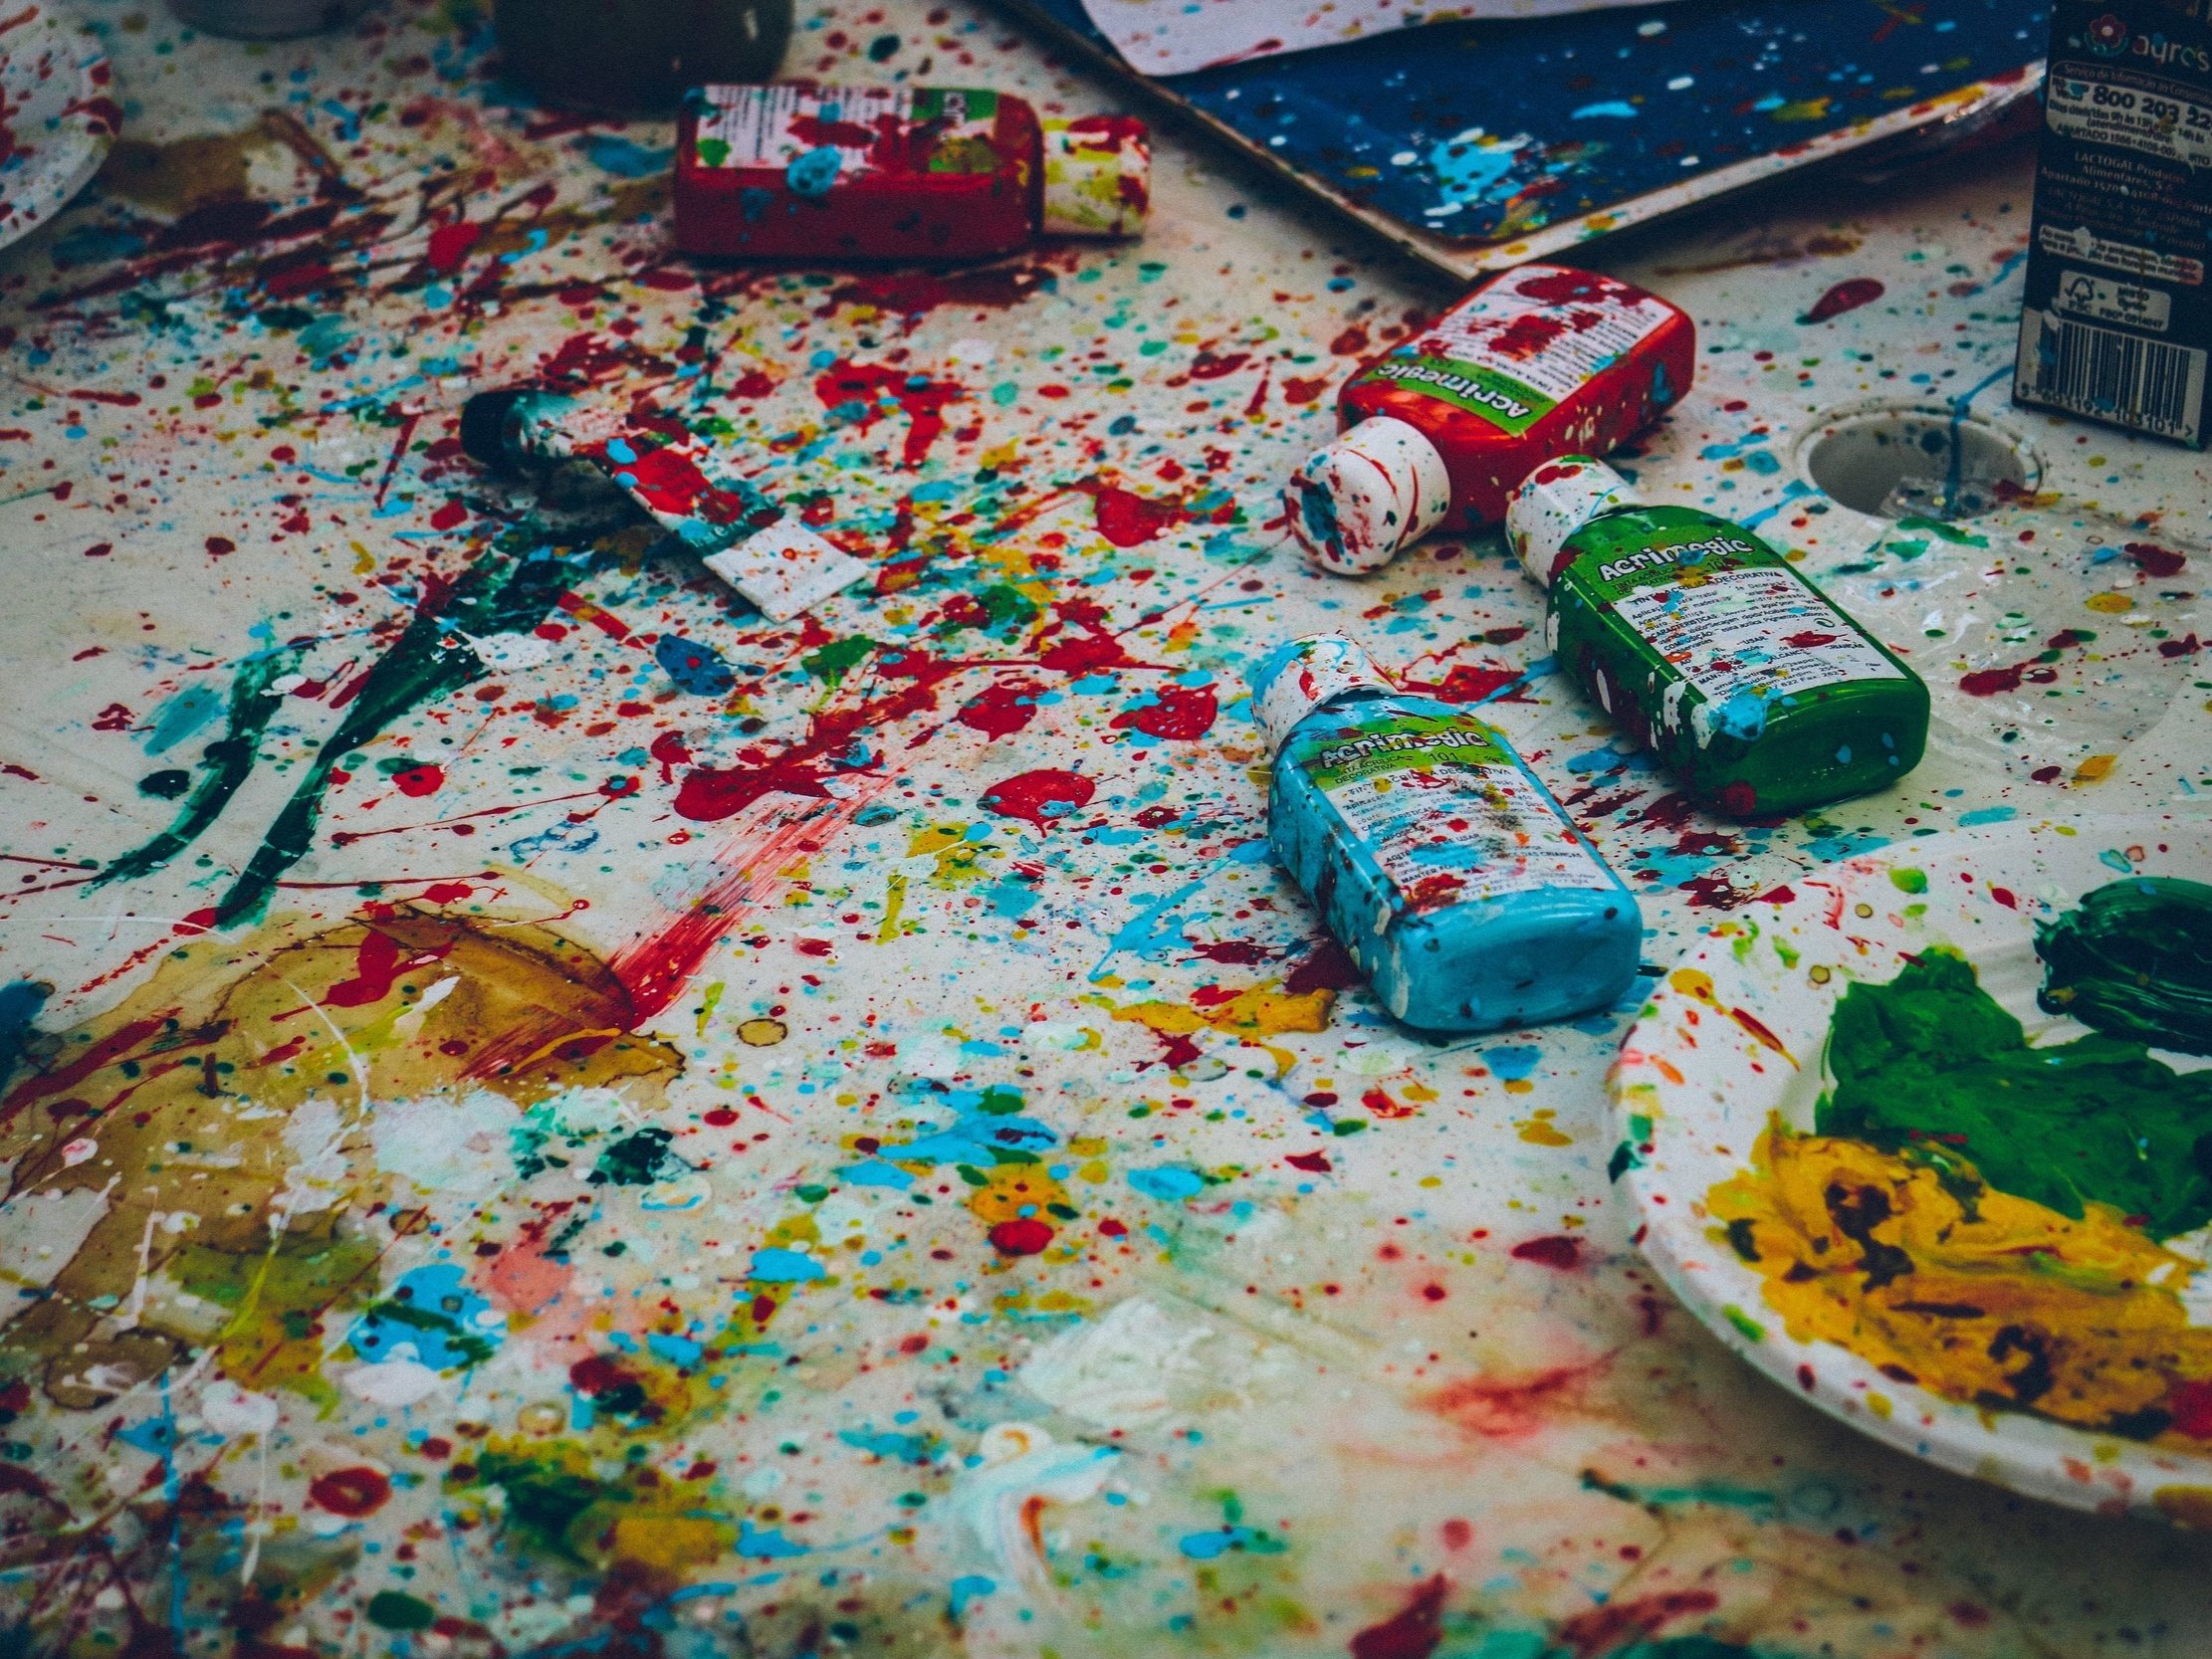 A messy surface with paint-covered paint bottles and paint splattered everywhere.